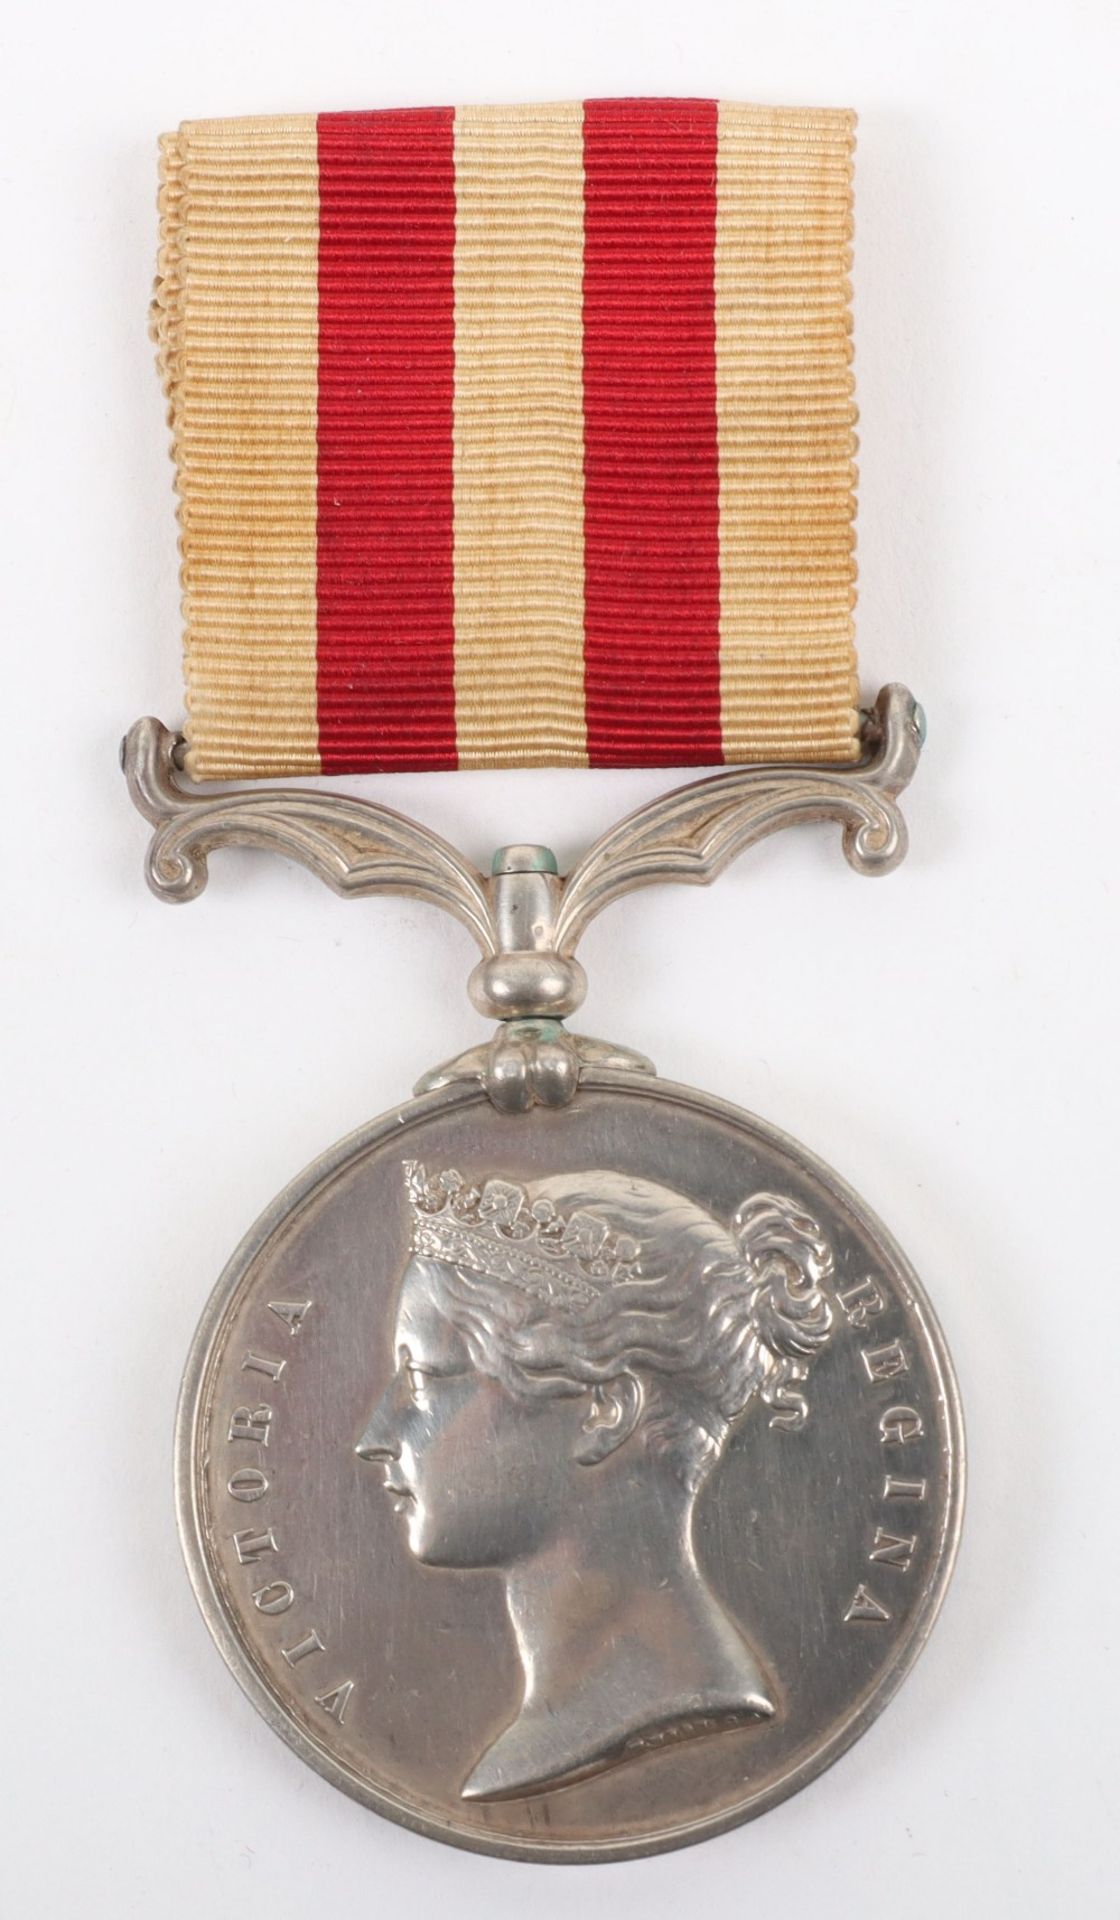 Indian Mutiny Medal 1857-59 Awarded to a Captain in the Madras Cavalry